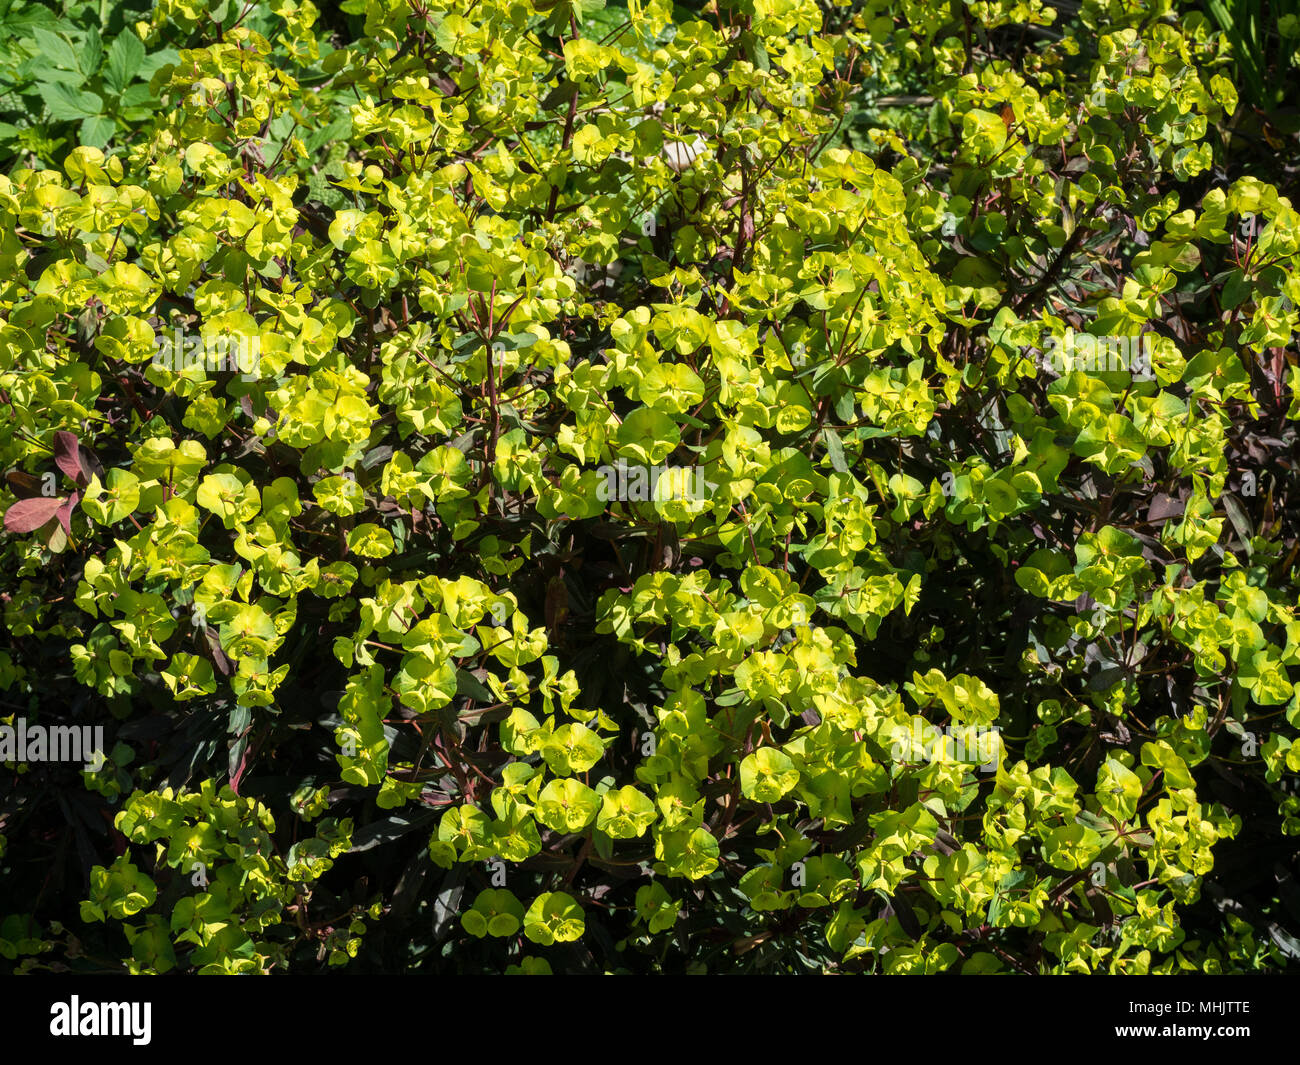 A full frame of the lime green flowers (bracts) of Euphorbia amygdaloides 'Purpurea' Stock Photo